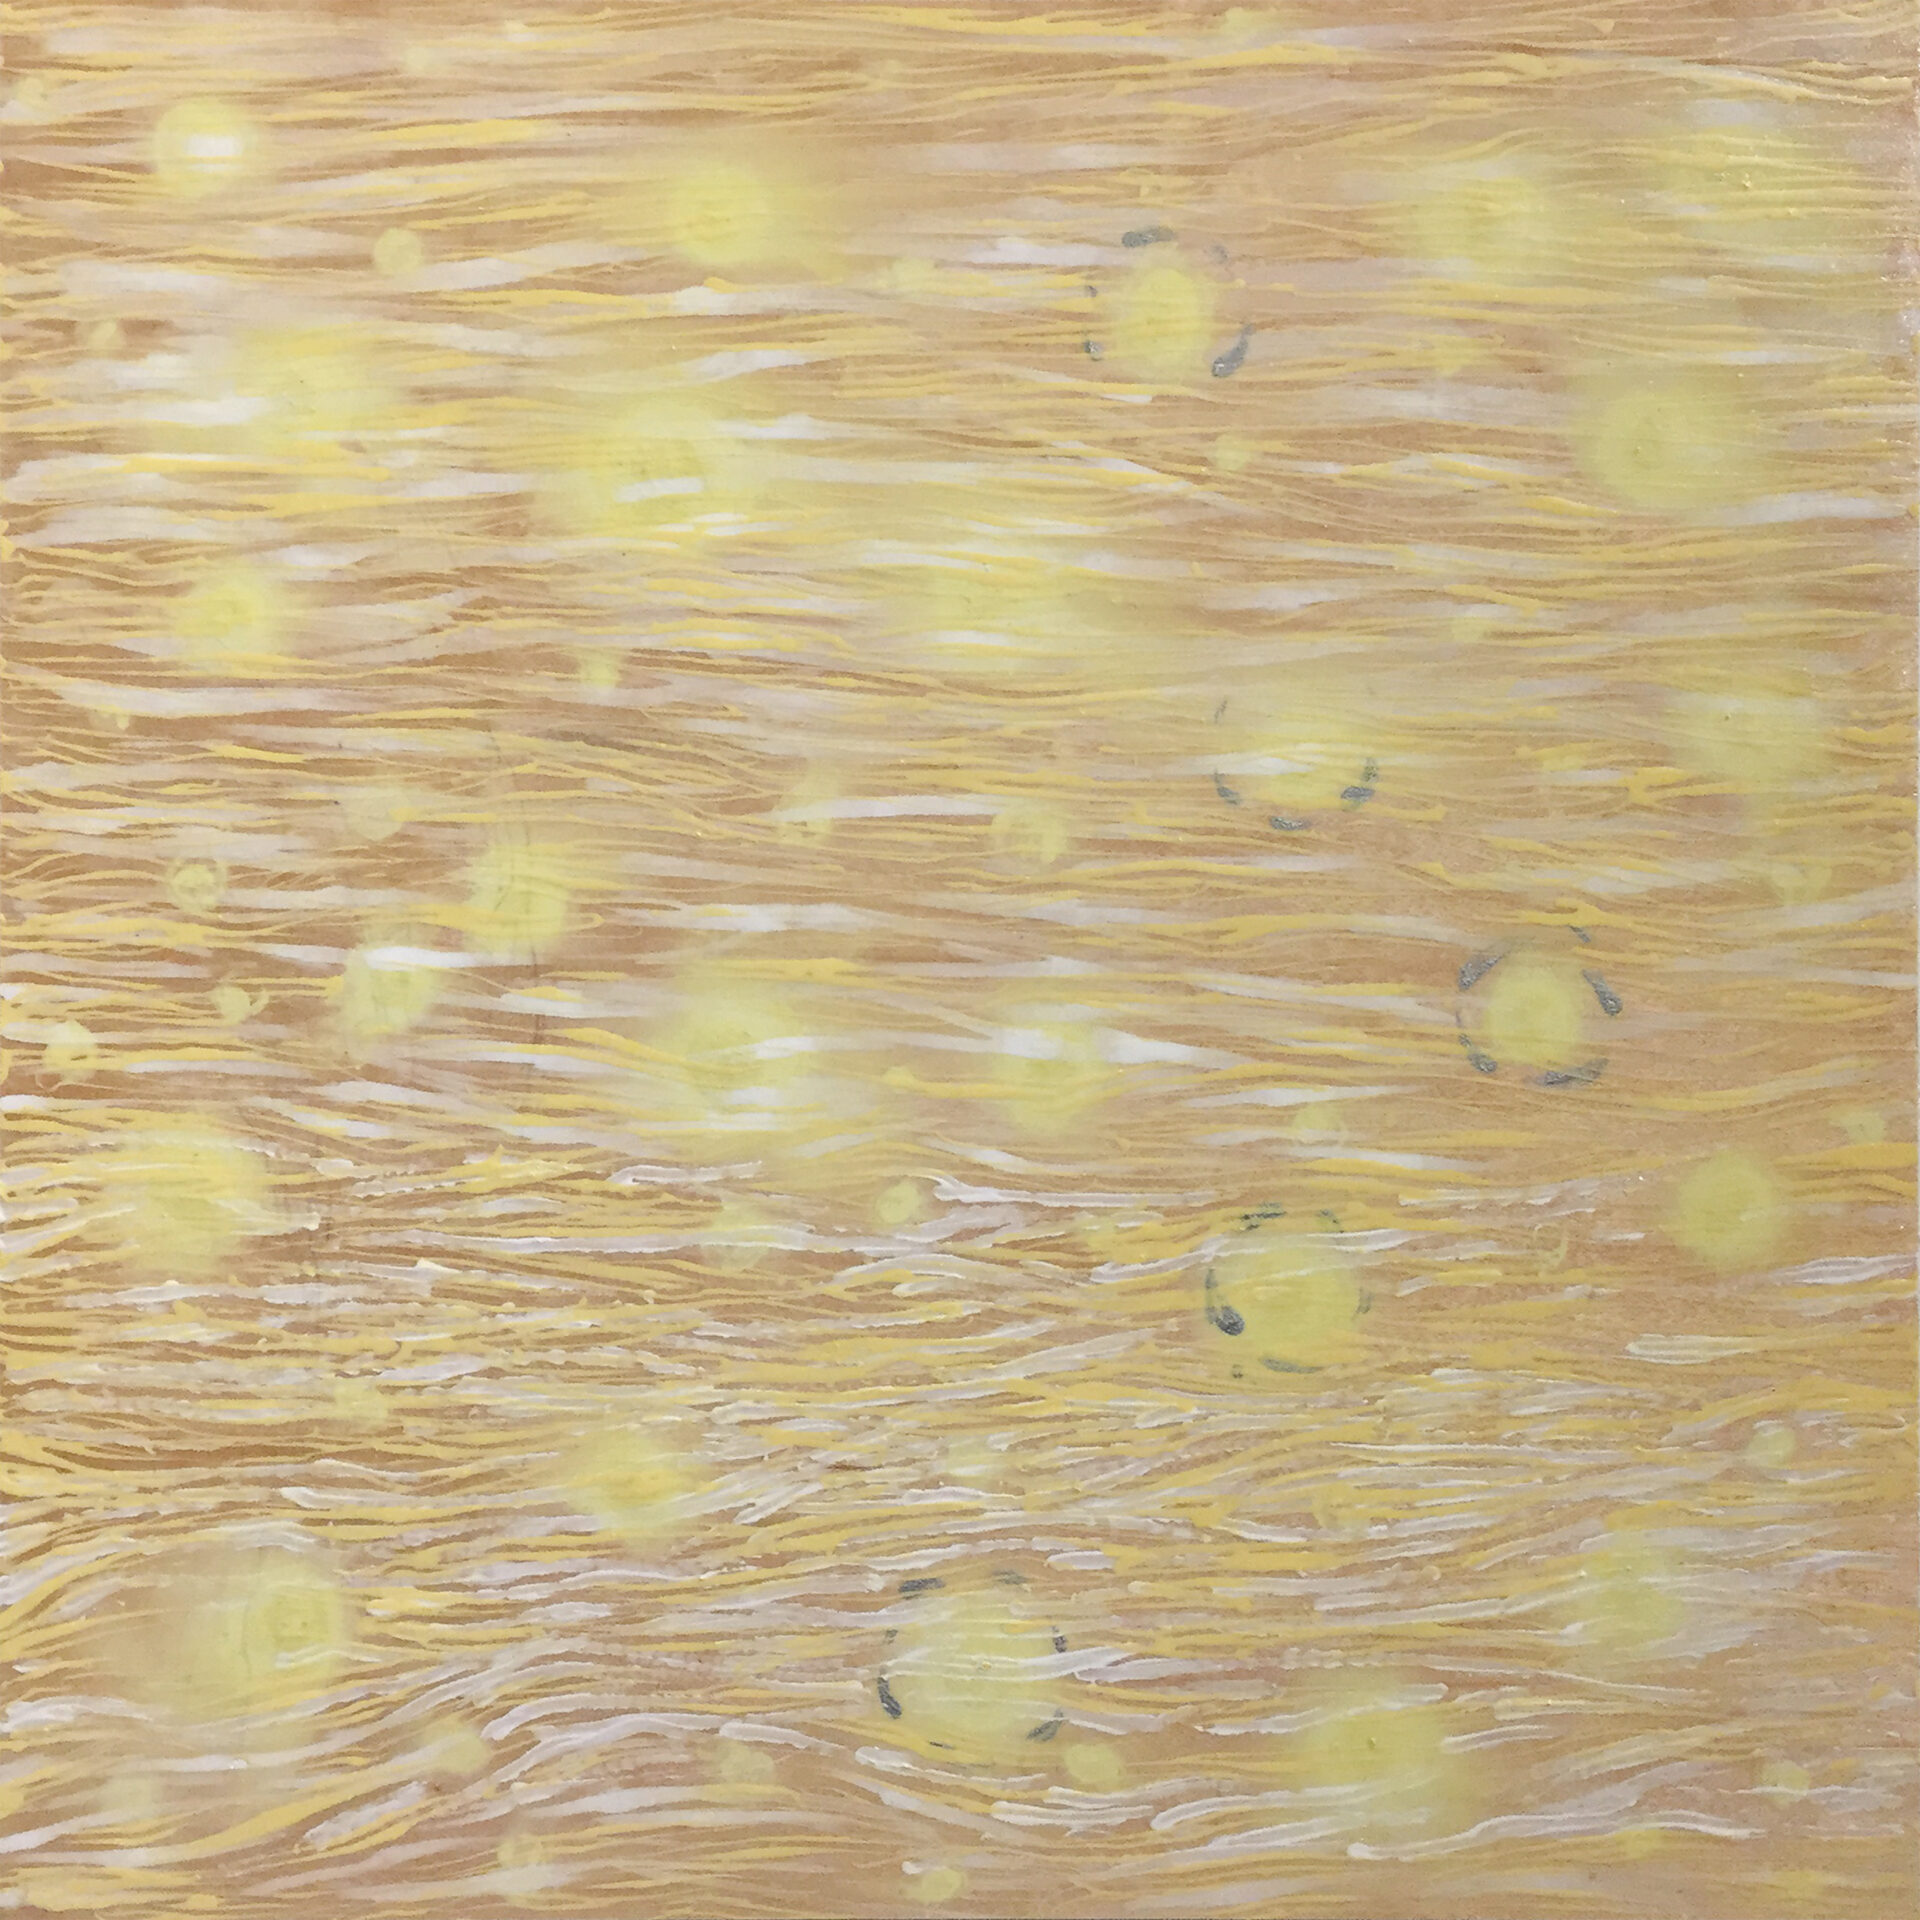 Brown painting with flowing lines and yellow circles